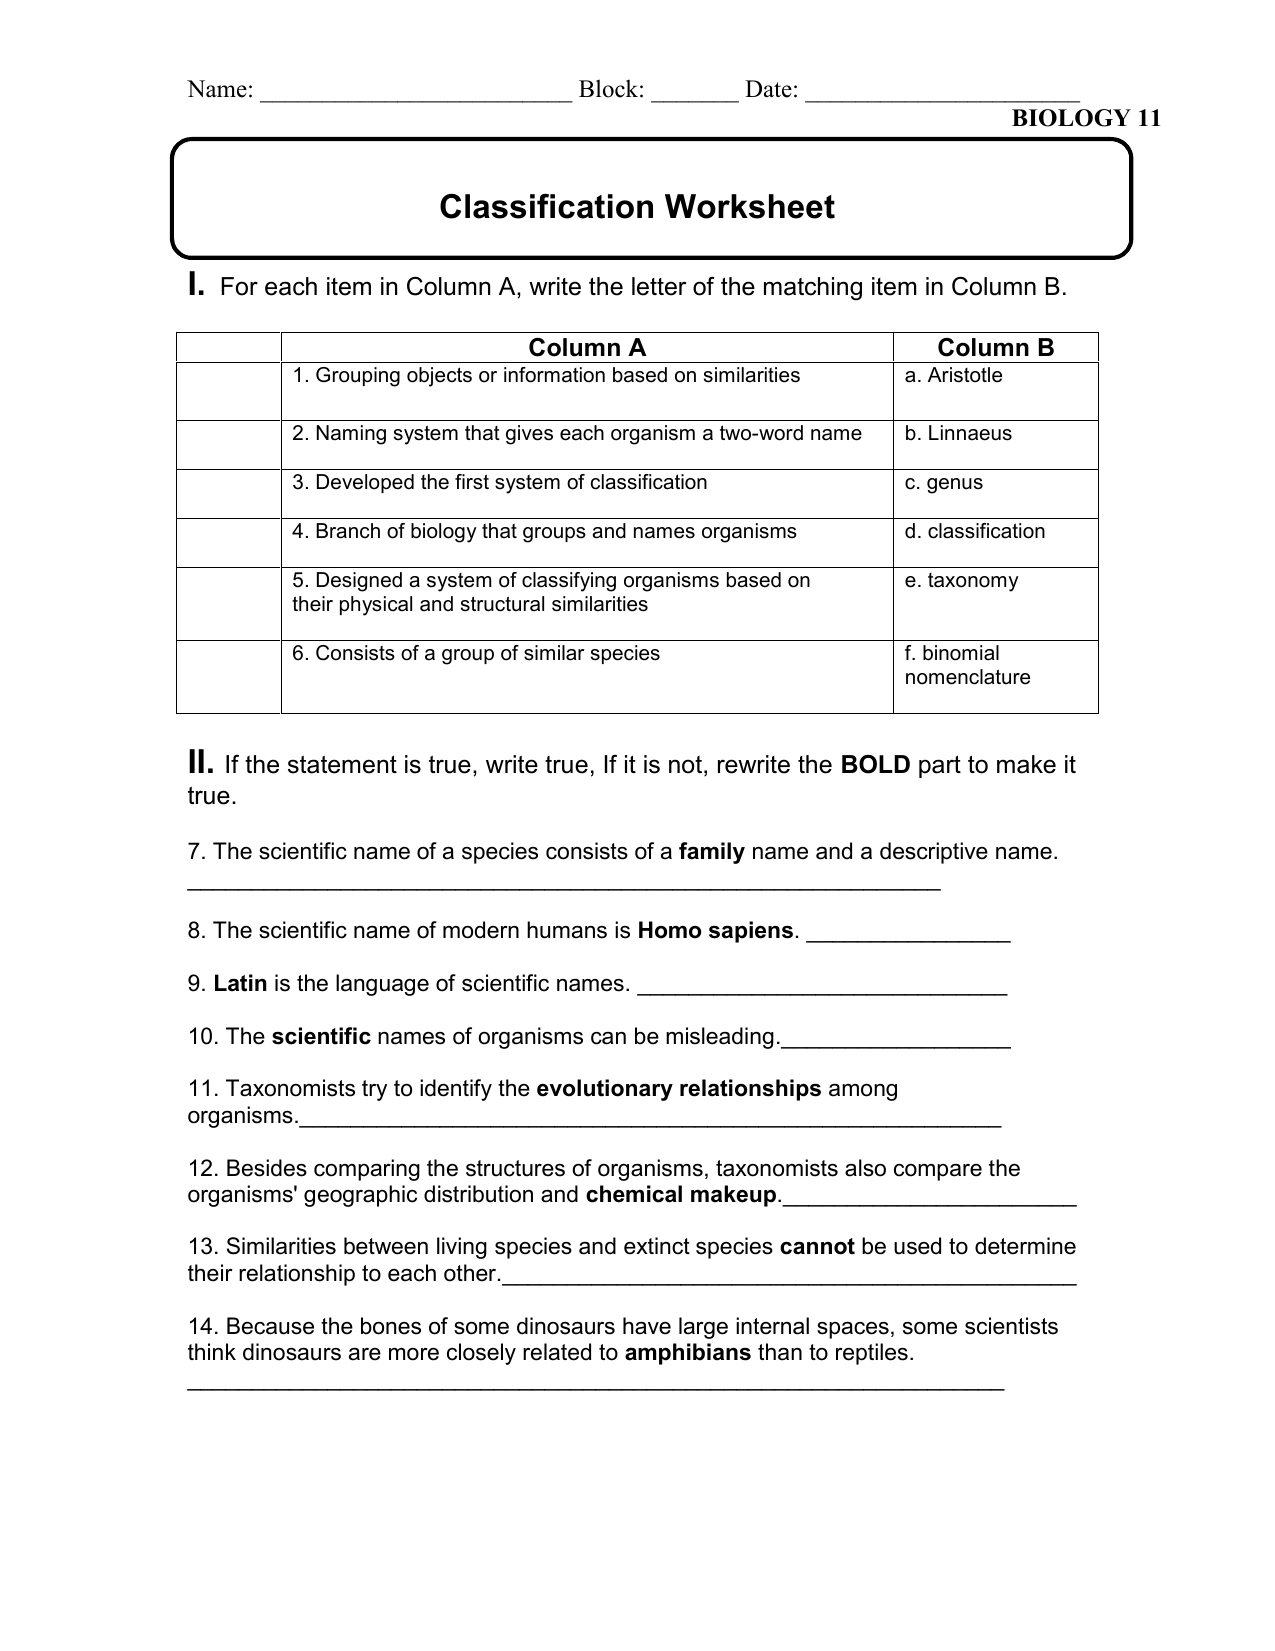 Classification Worksheet Throughout Biological Classification Worksheet Answers